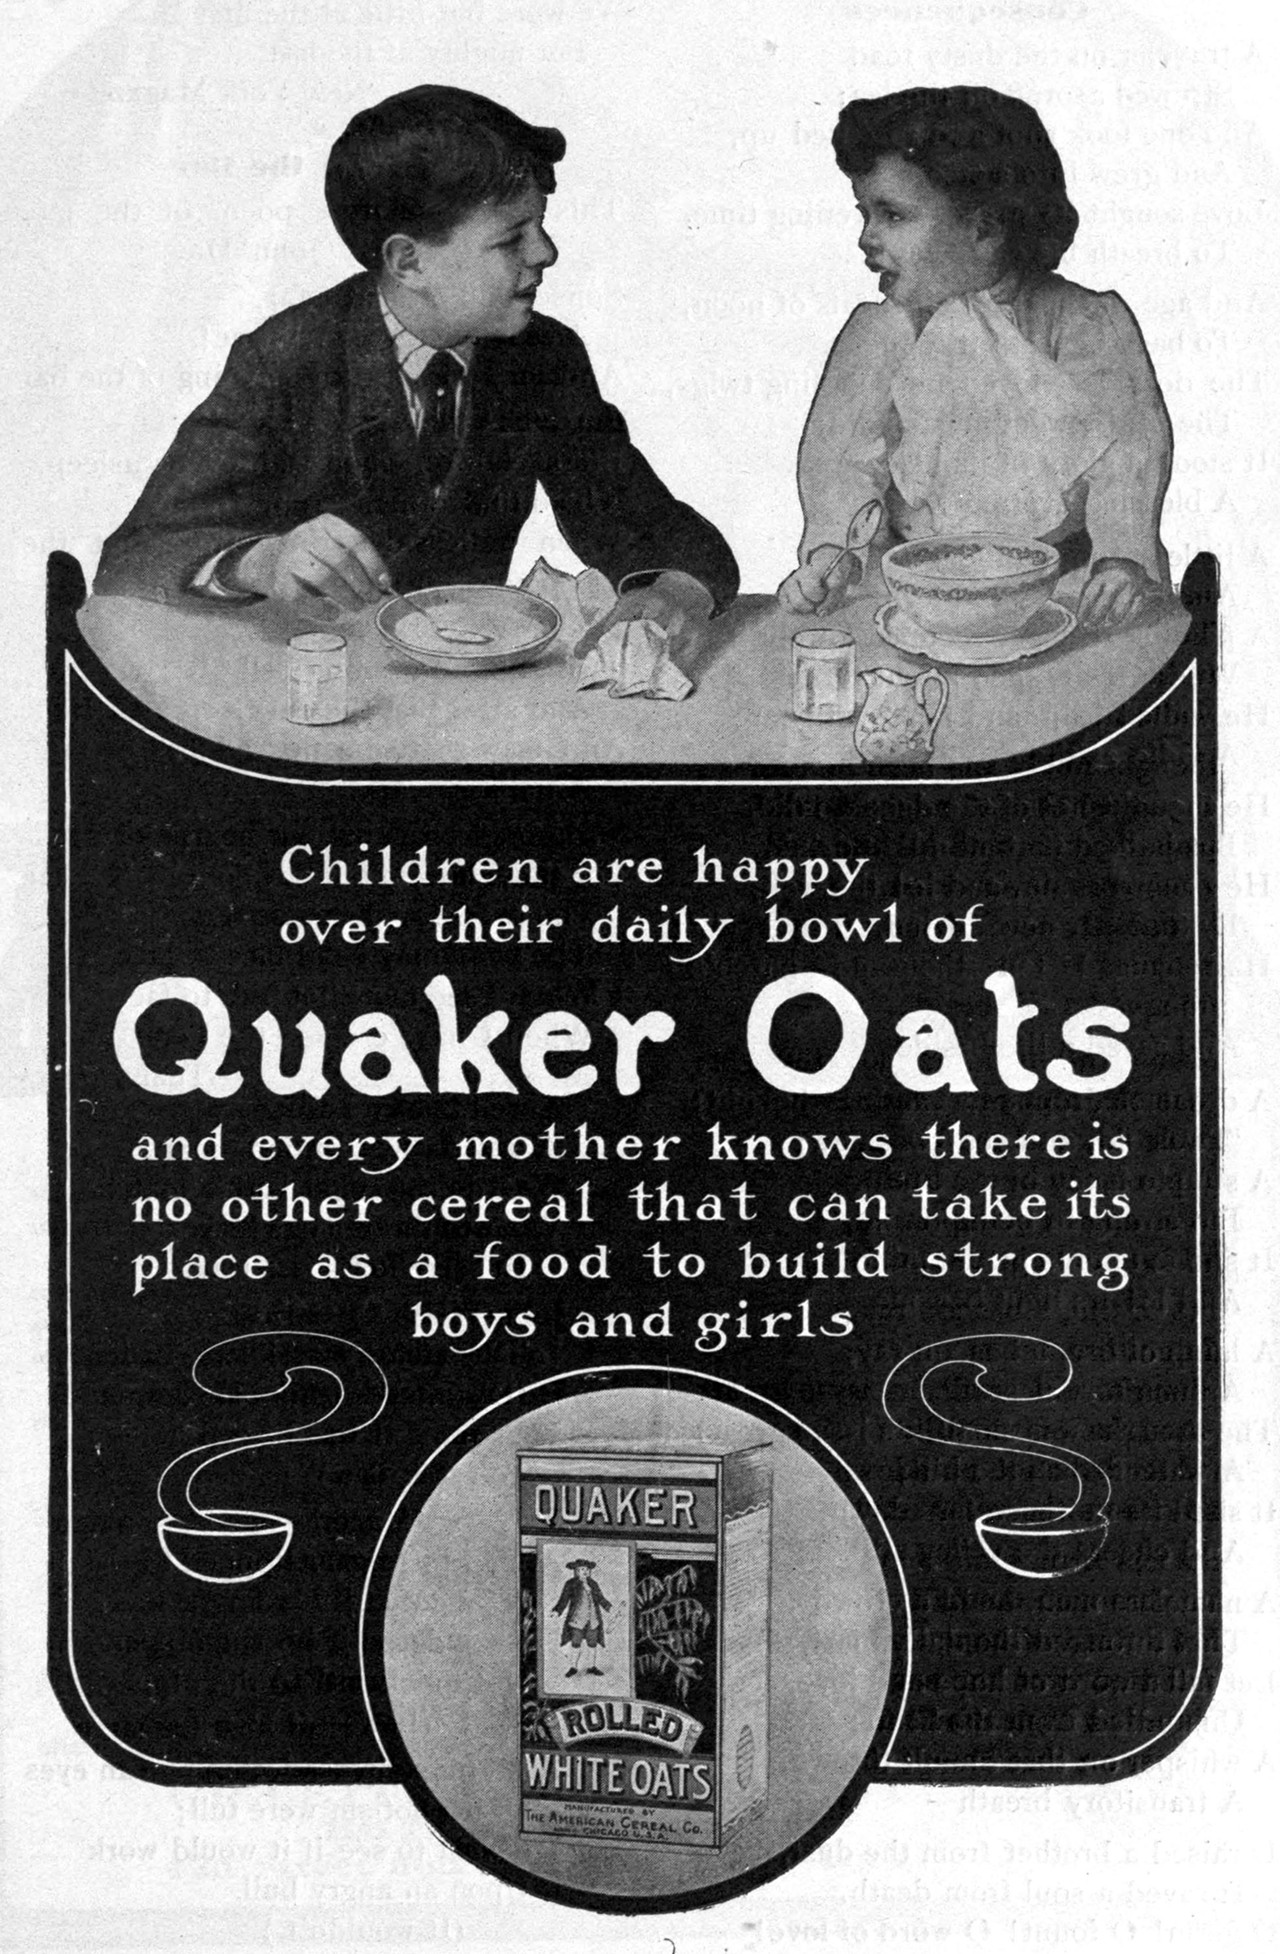 Quaker Square in Akron is where all the magic started. Oatmeal and breakfast cereals! The complex is now owned by the University of Akron, which turned it into dorms and offices.